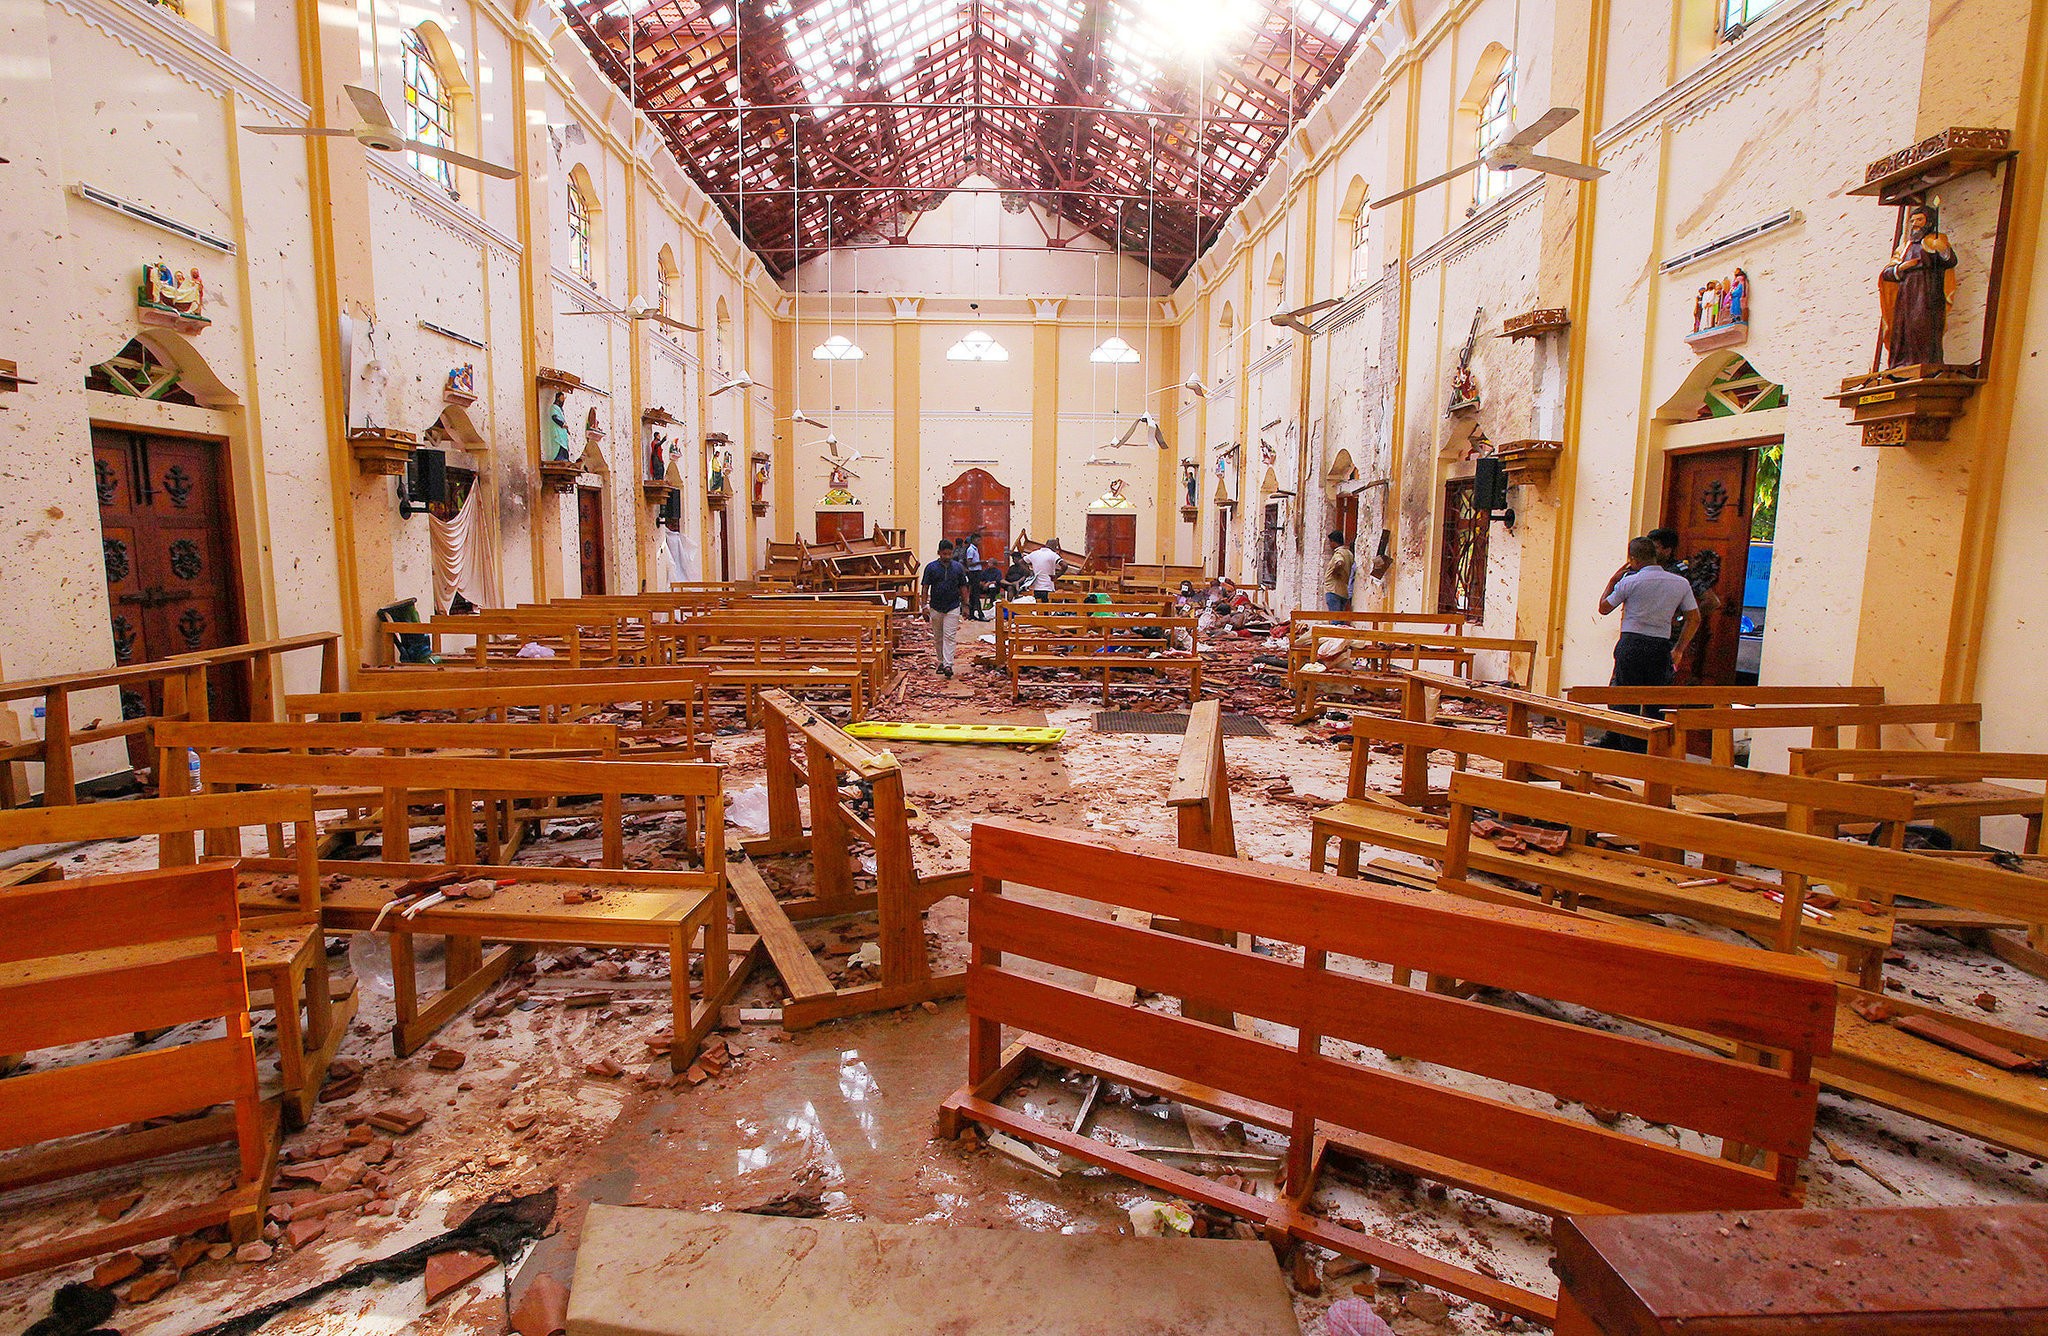 SJB demands action against masterminds of Easter Sunday attacks